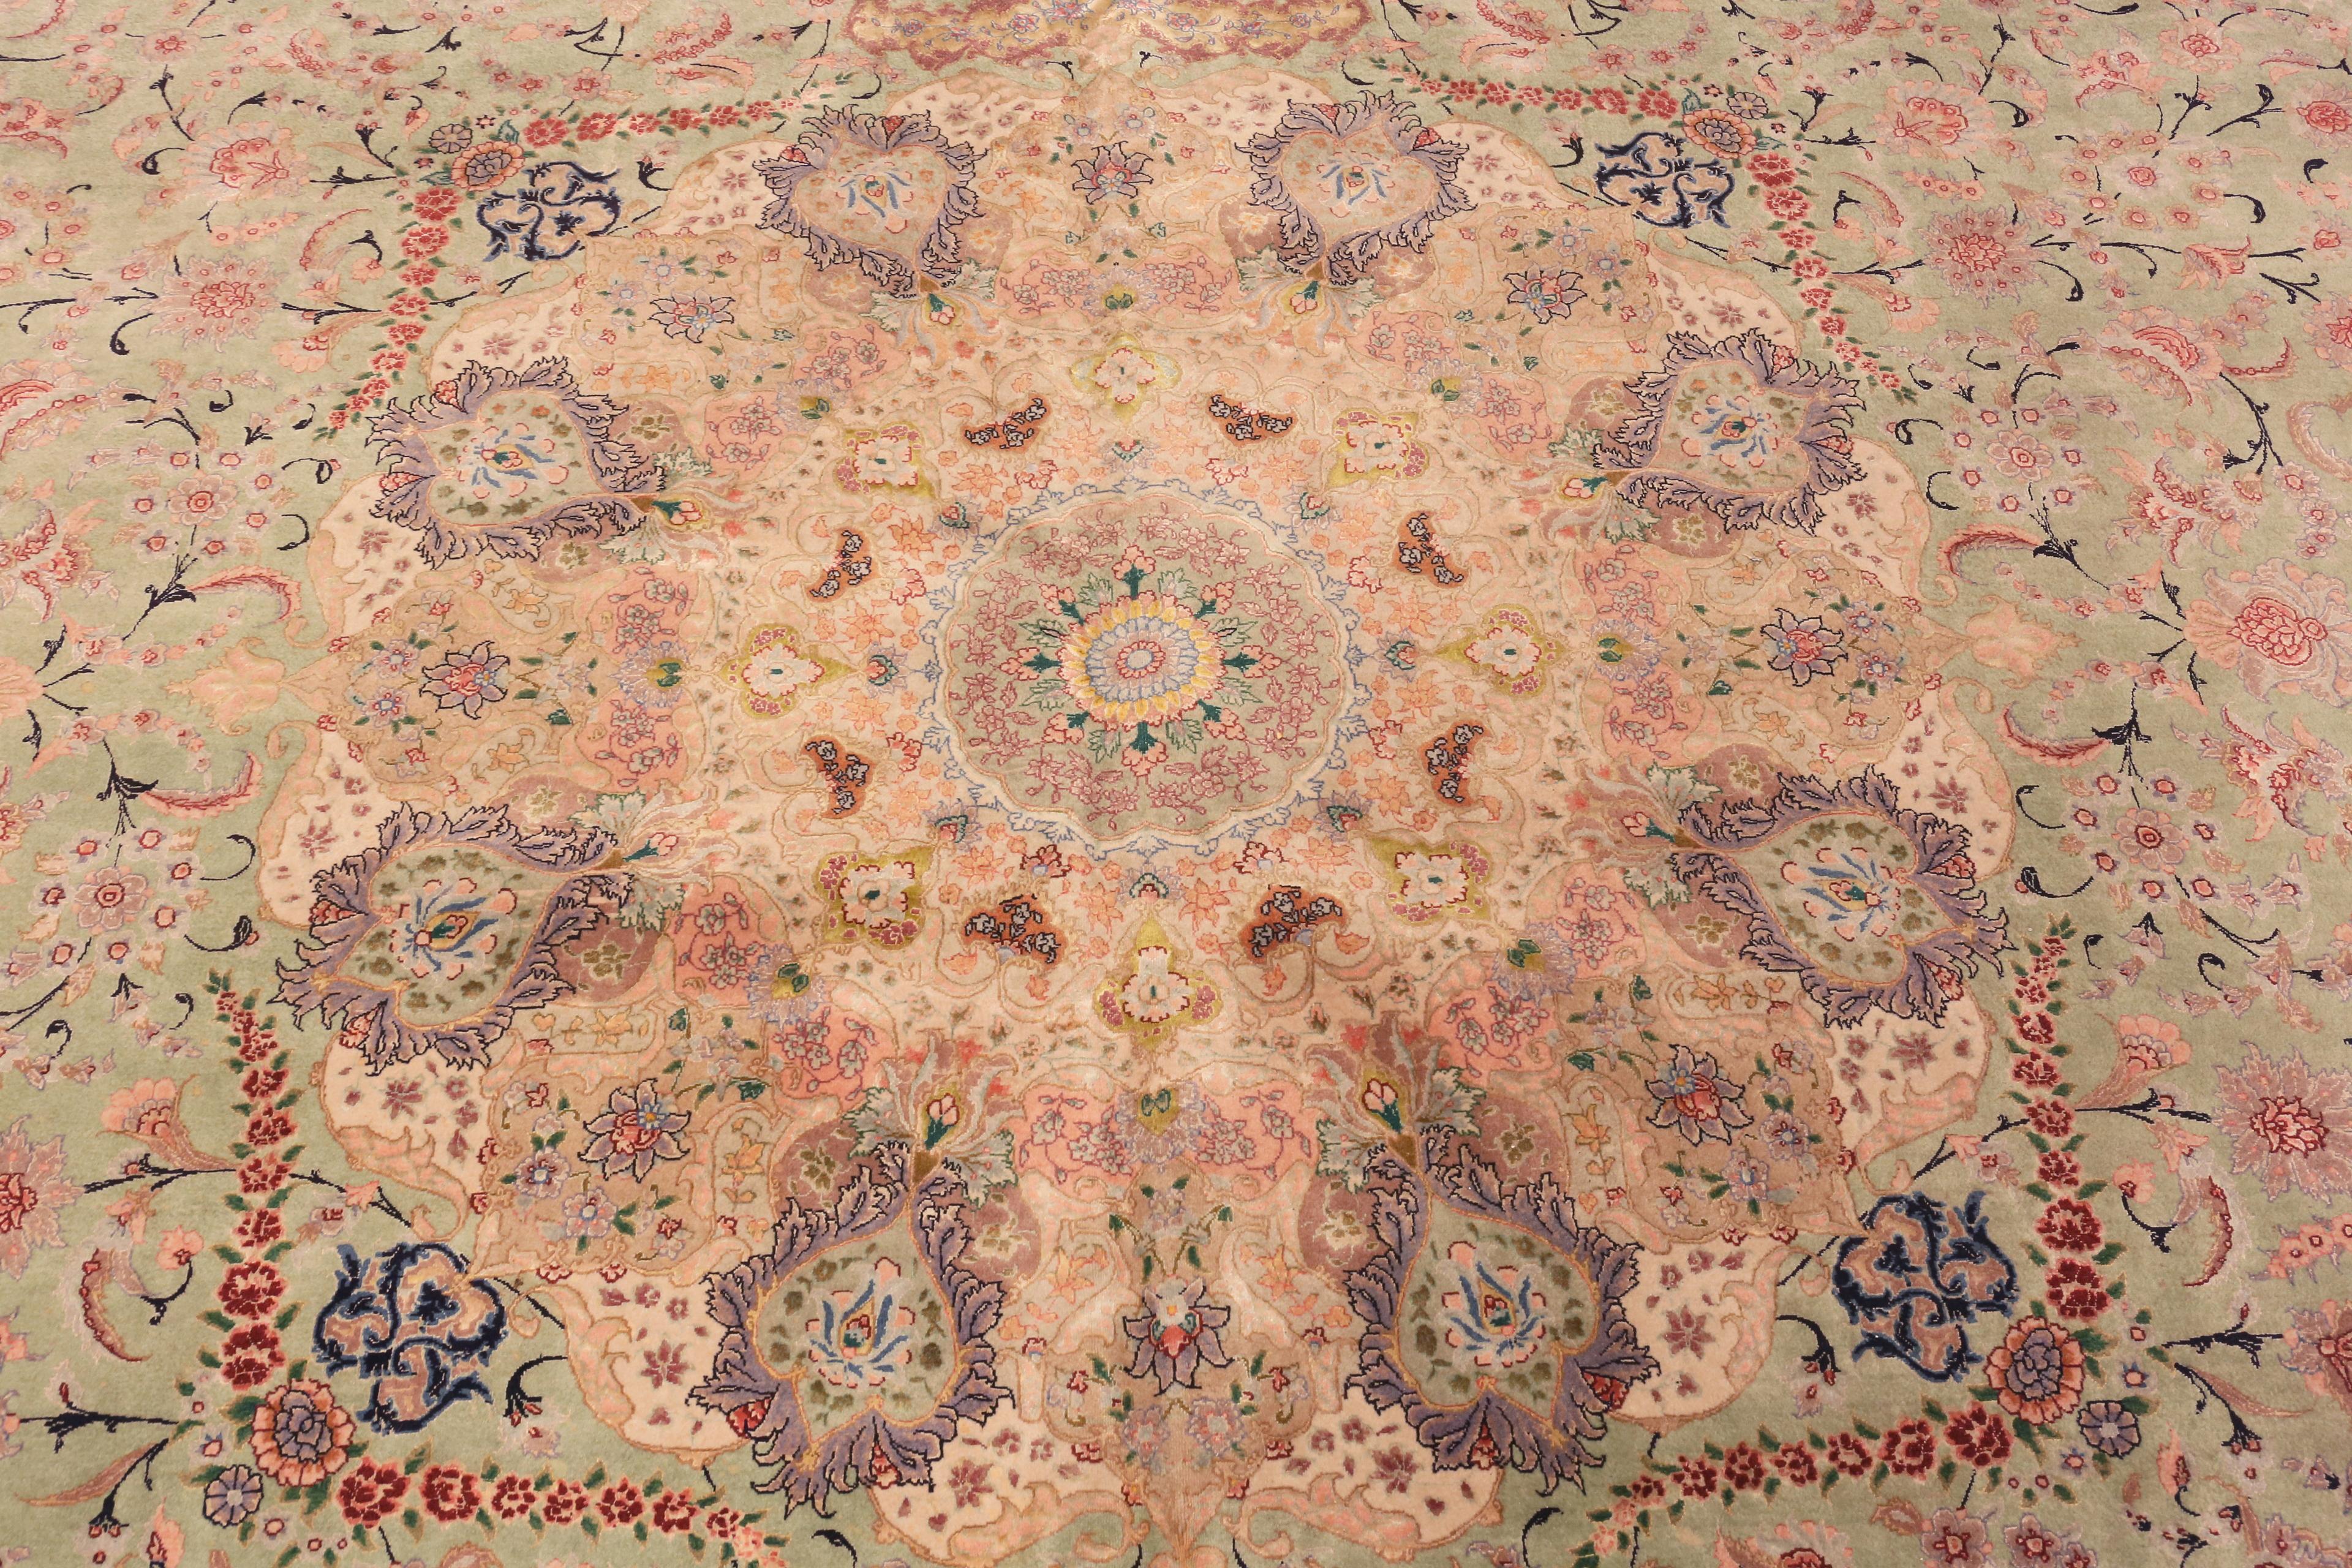 20th Century Vintage Persian Tabriz Large Silk And Wool Rug. Size: 11 ft 2 in x 16 ft 4 in